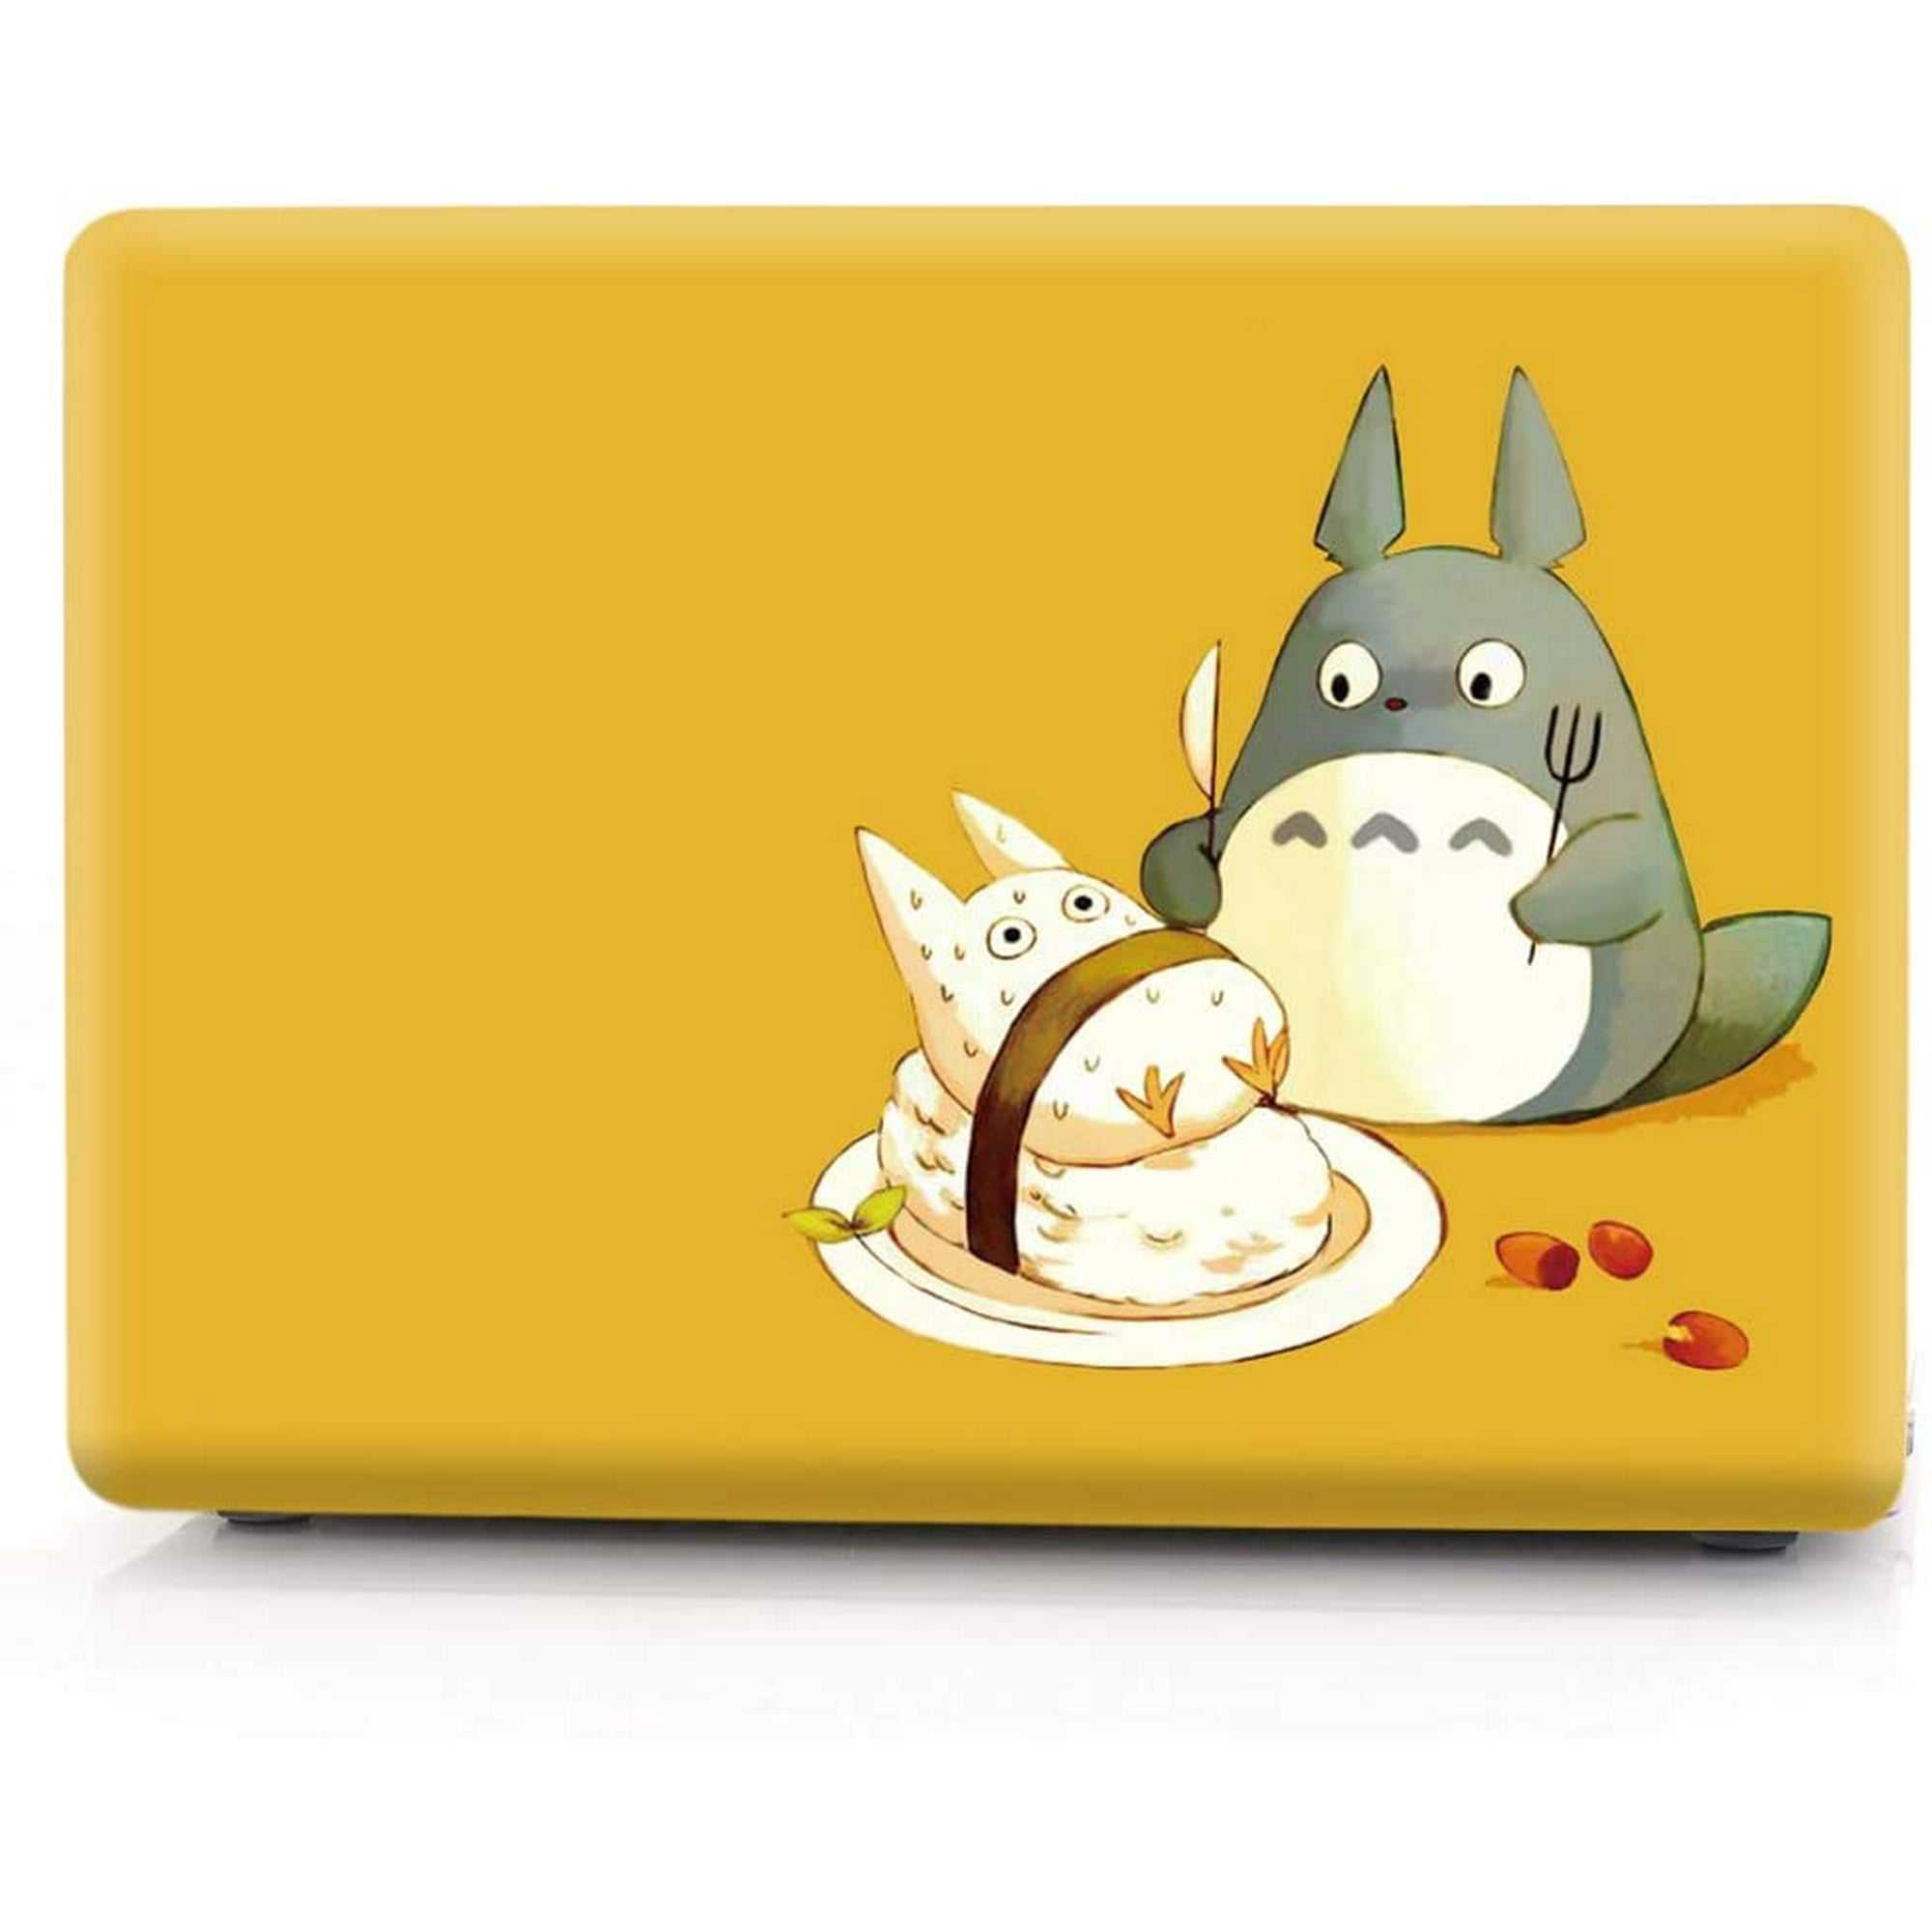 HRH Cute Funny Totoro Design Laptop Body Shell Protective PC Hard Case for Apple  MacBook Air 